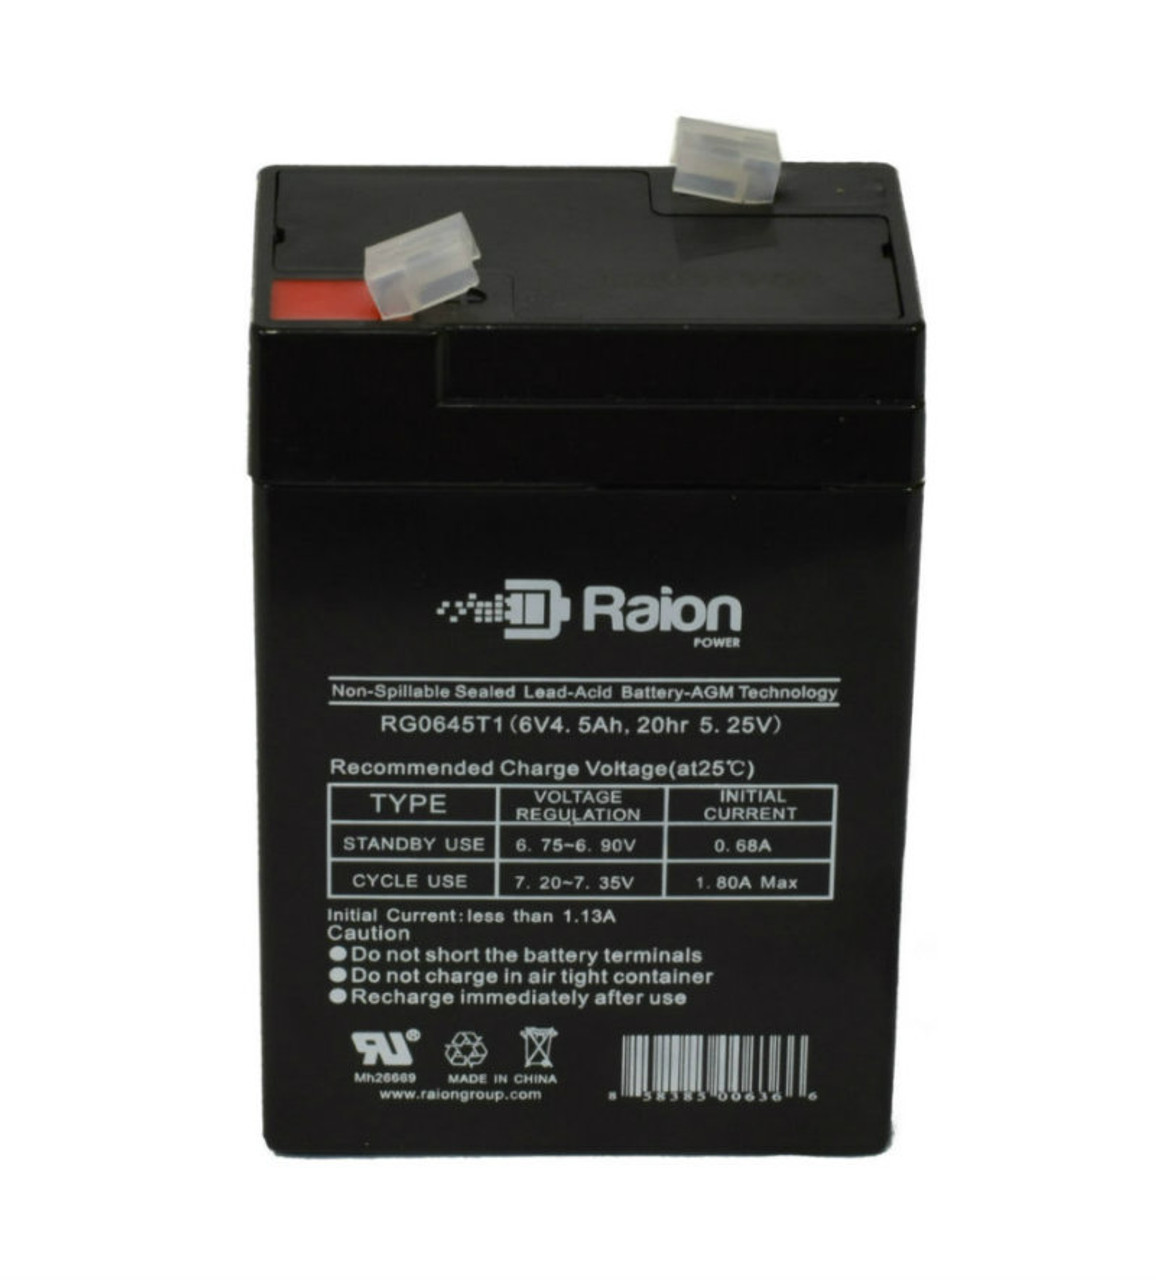 Raion Power RG0645T1 Replacement Battery Cartridge for Kid Trax KT1164 Disney Frozen Twinkling Lights Scooter